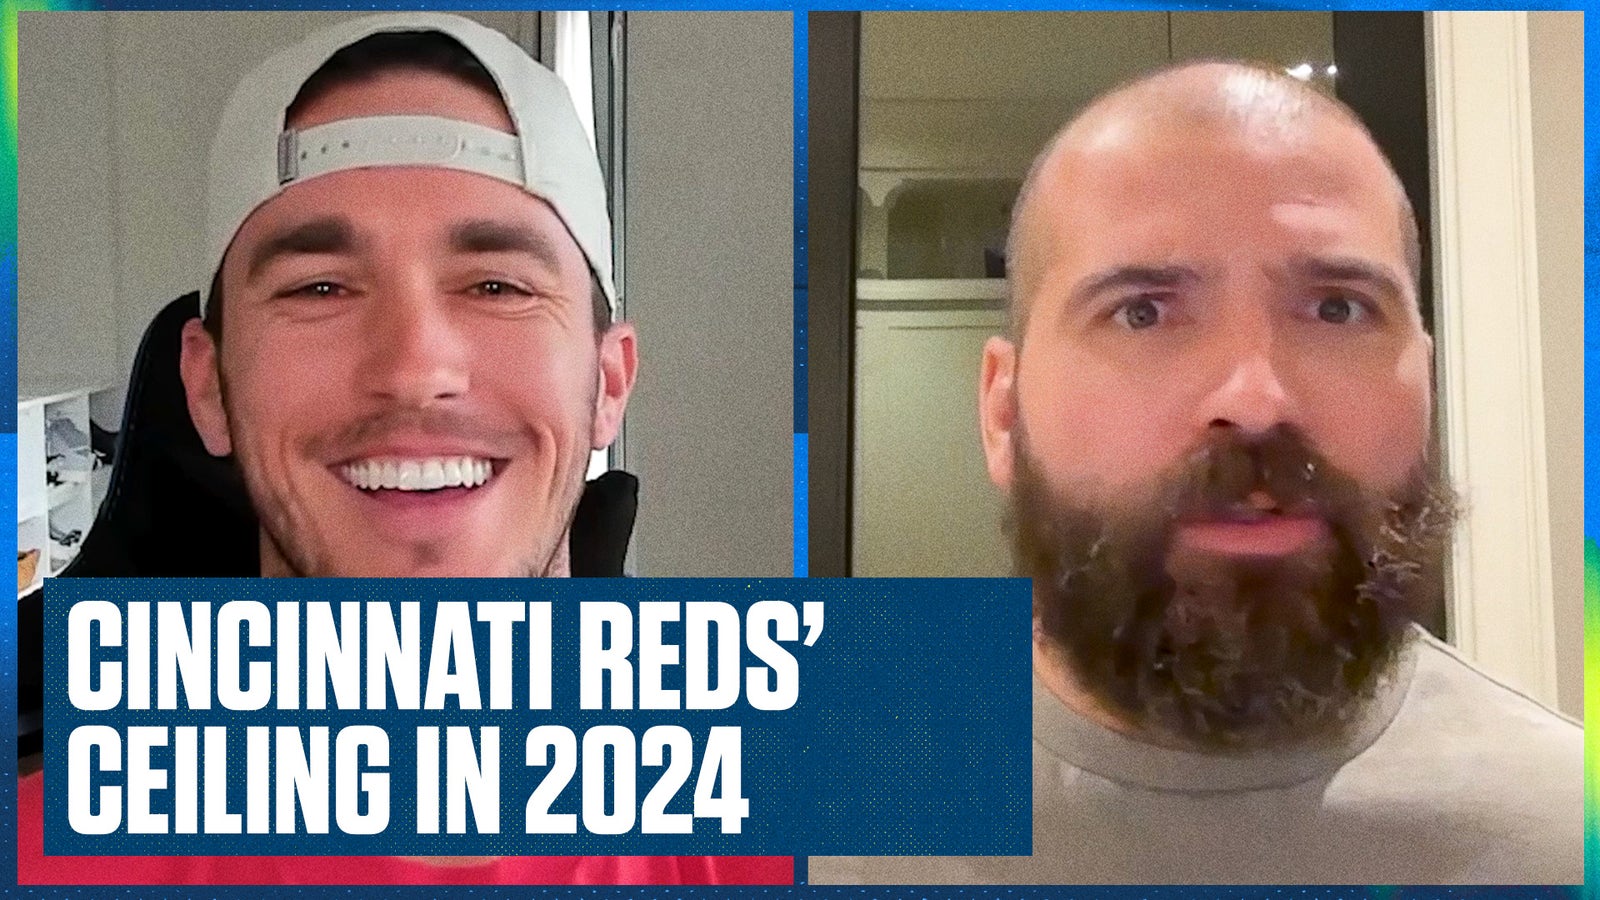 Joey Votto on playing 17 seasons for the Reds and their 2024 ceiling